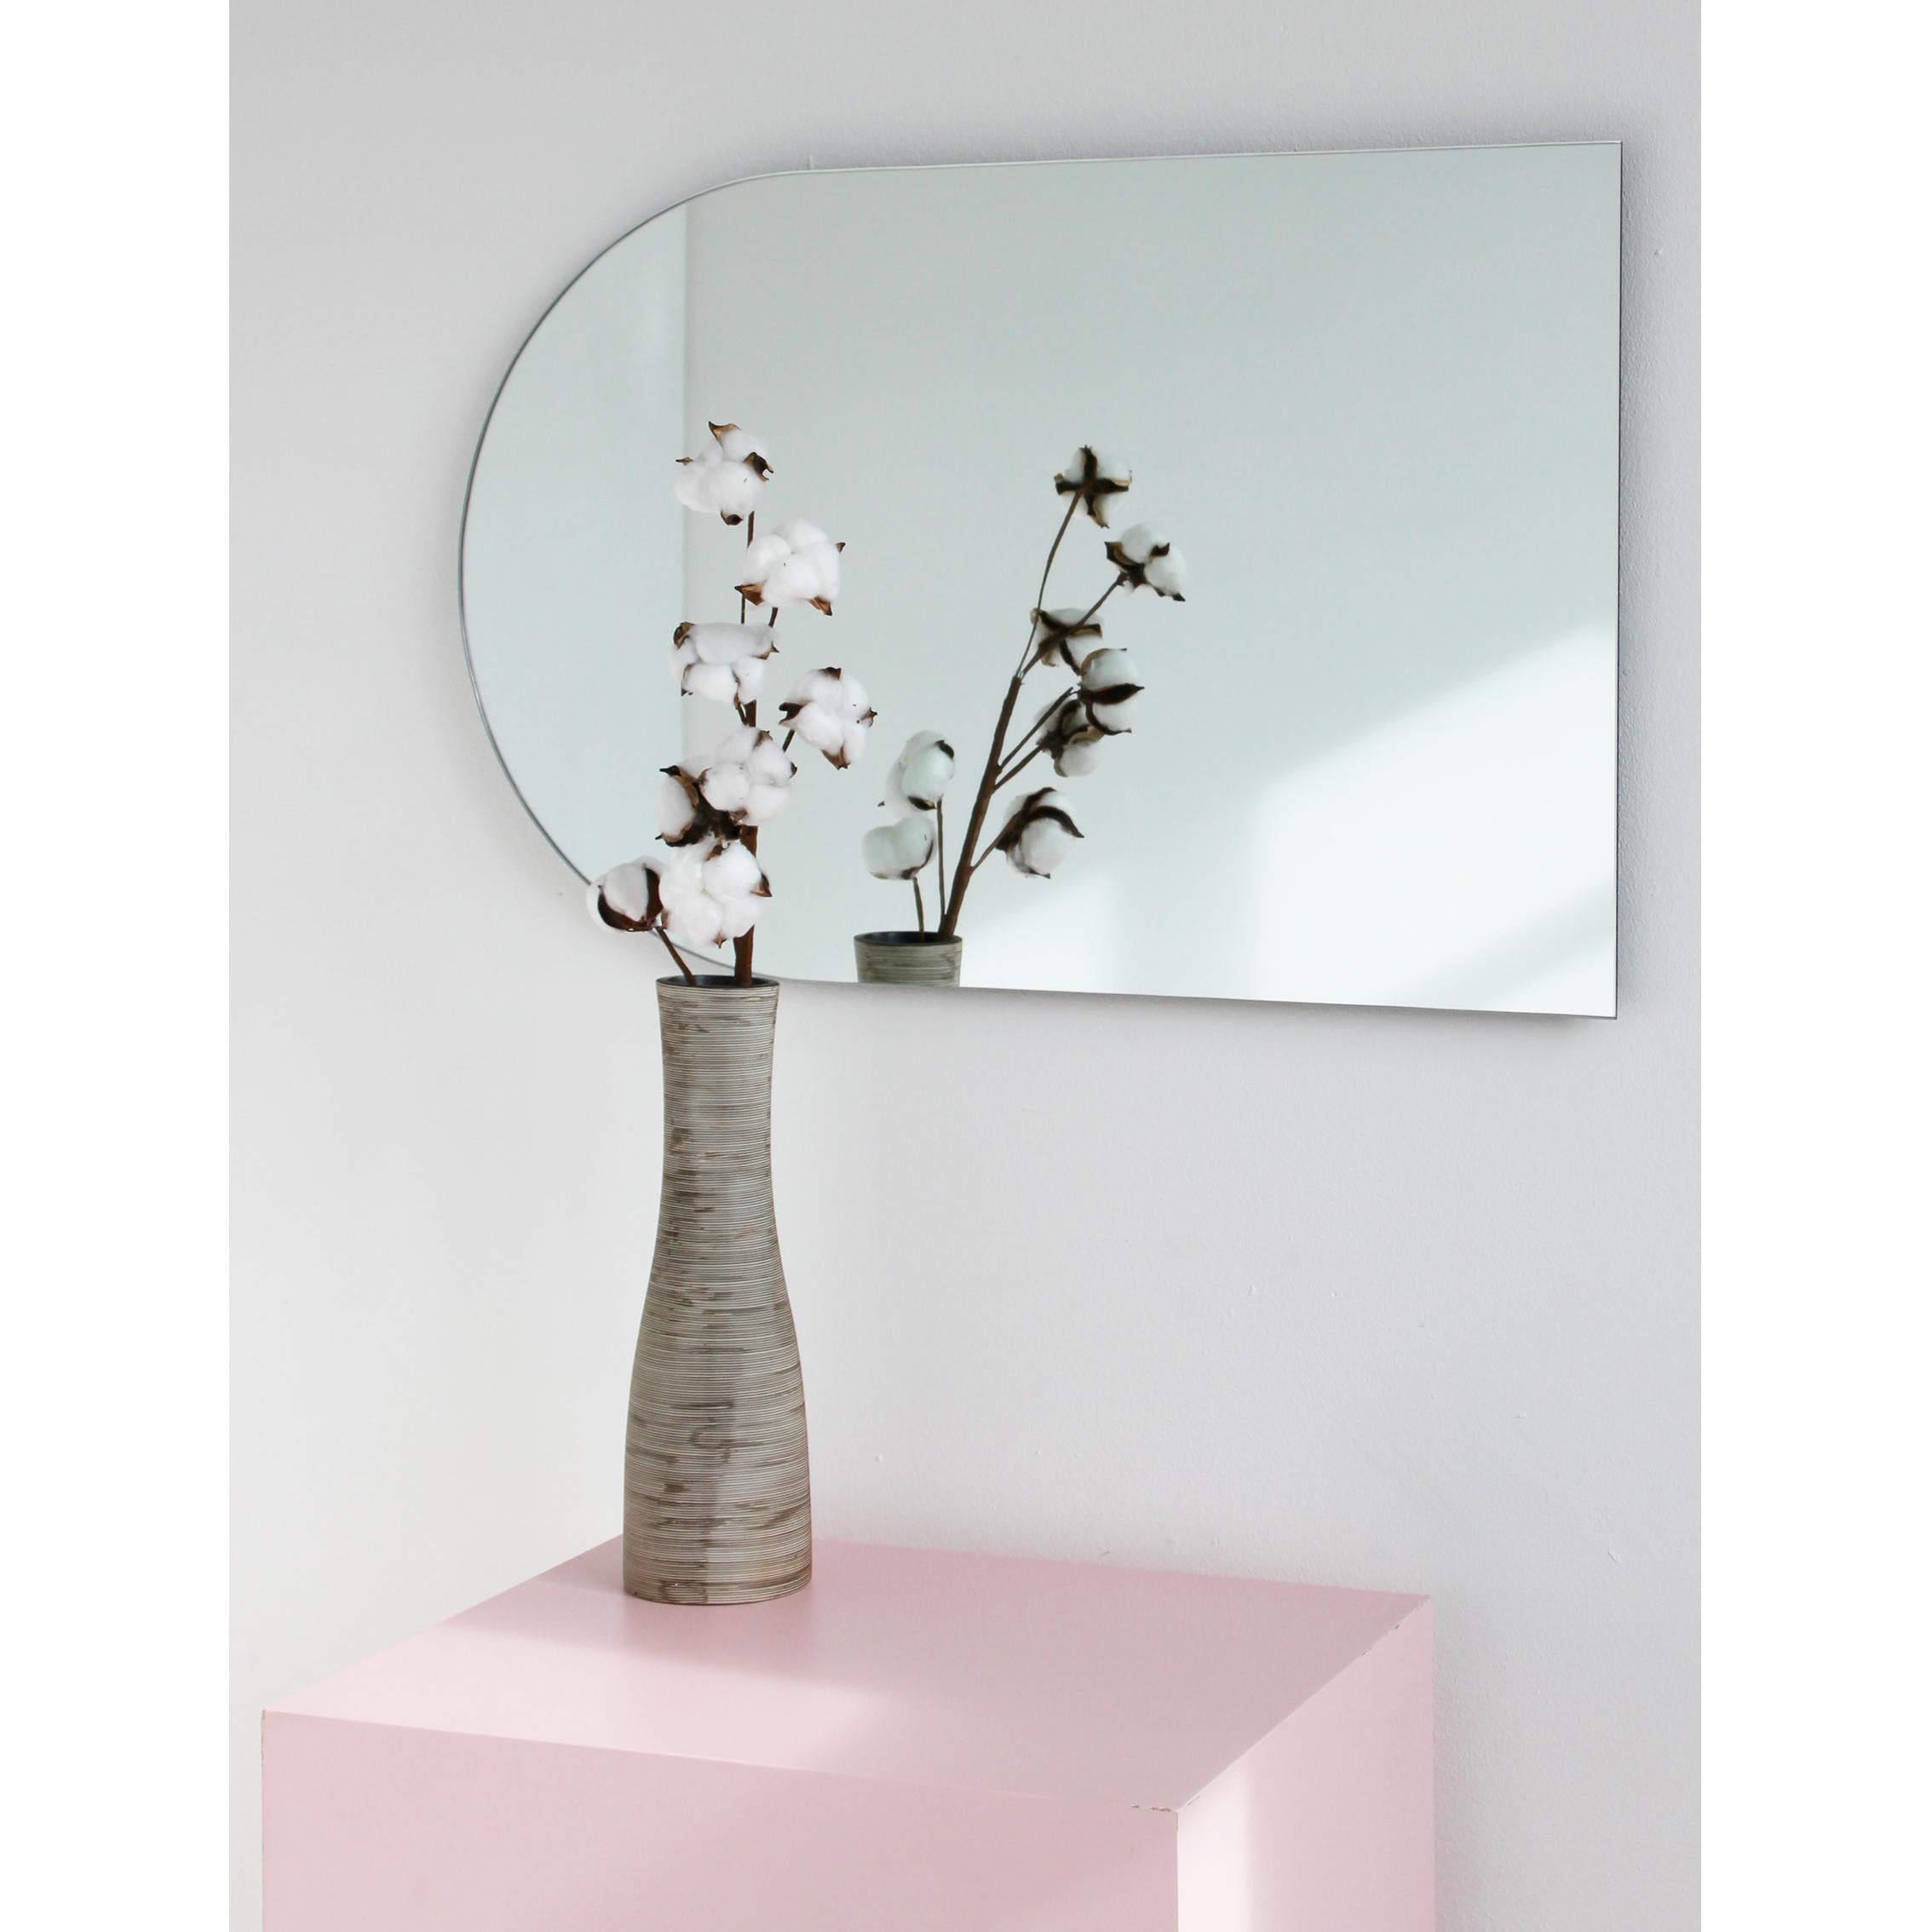 Arcus Arched Minimalist Frameless Mirror with Floating Effect, Large In New Condition For Sale In London, GB